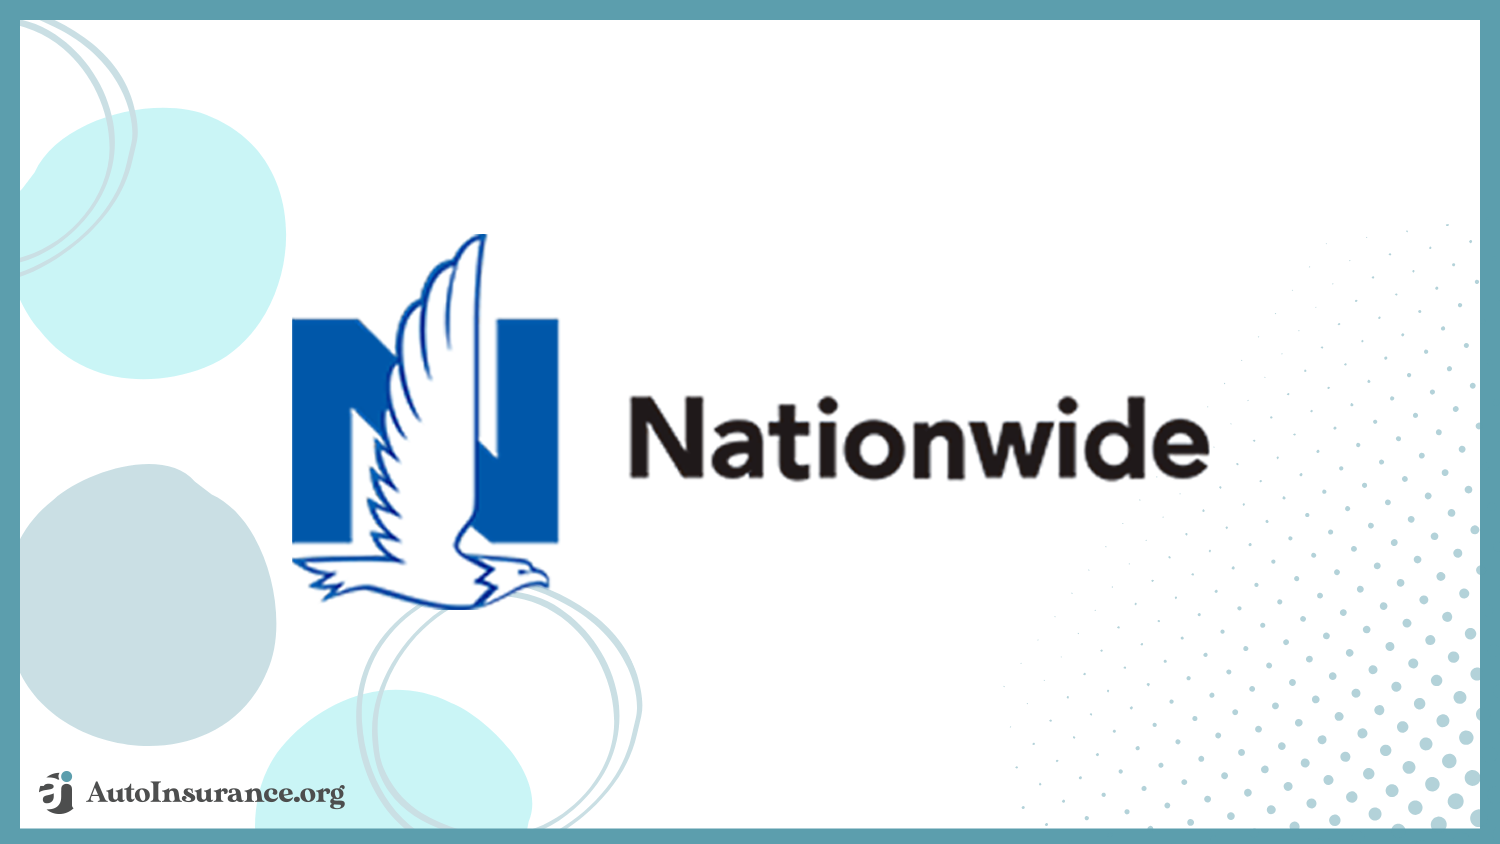 Nationwide: cheap auto insurance for families with multiple drivers